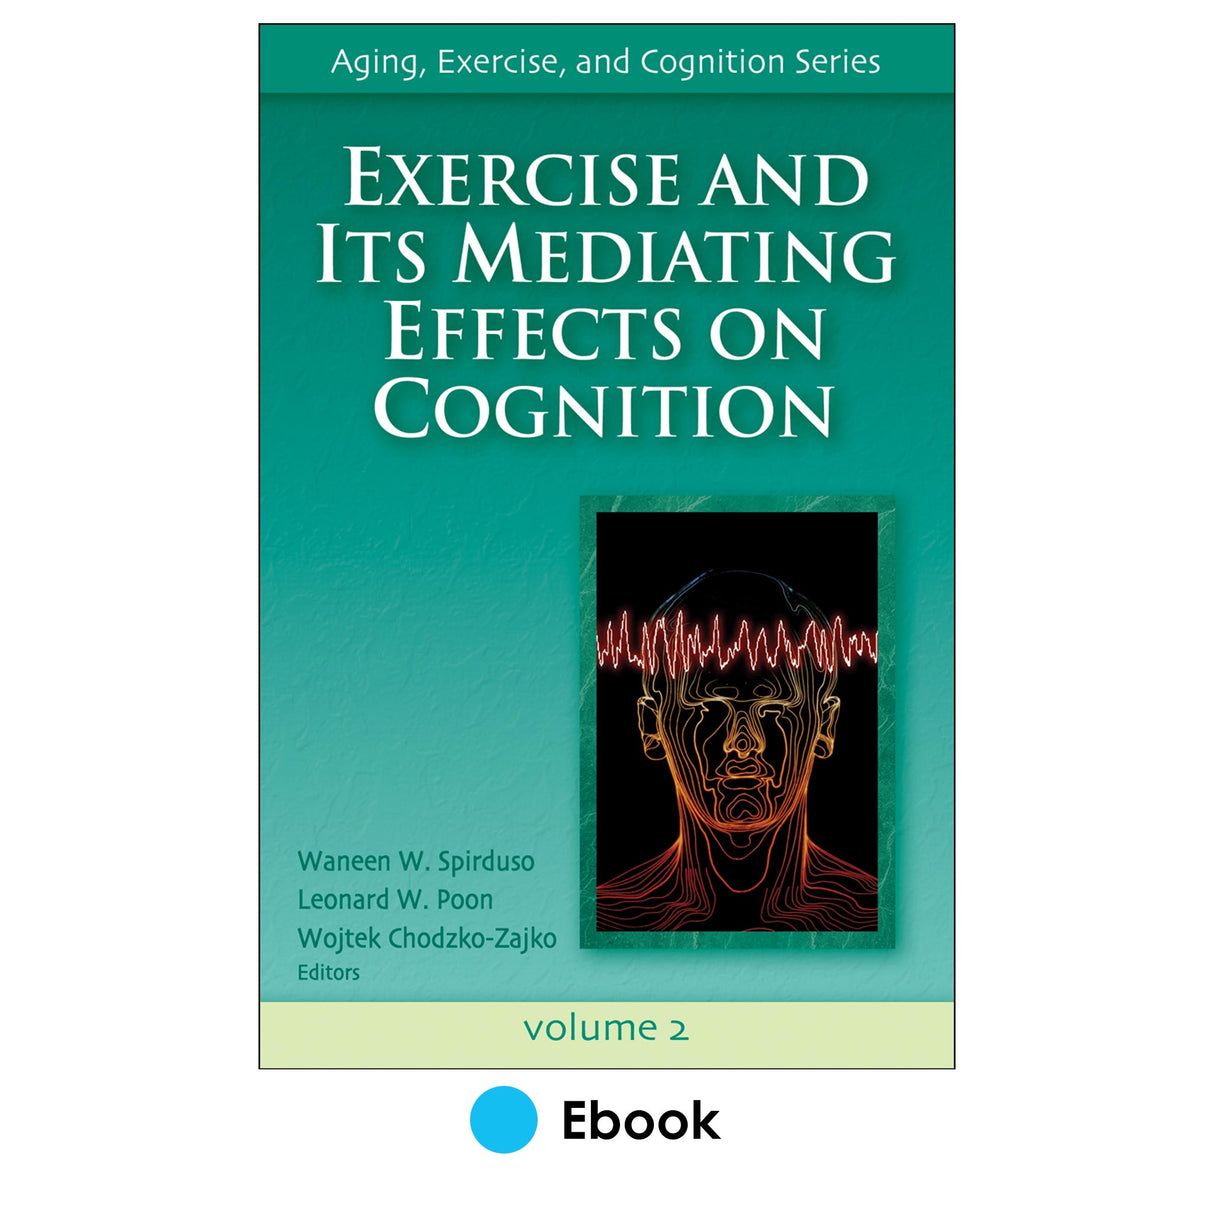 Exercise and Its Mediating Effects on Cognition PDF